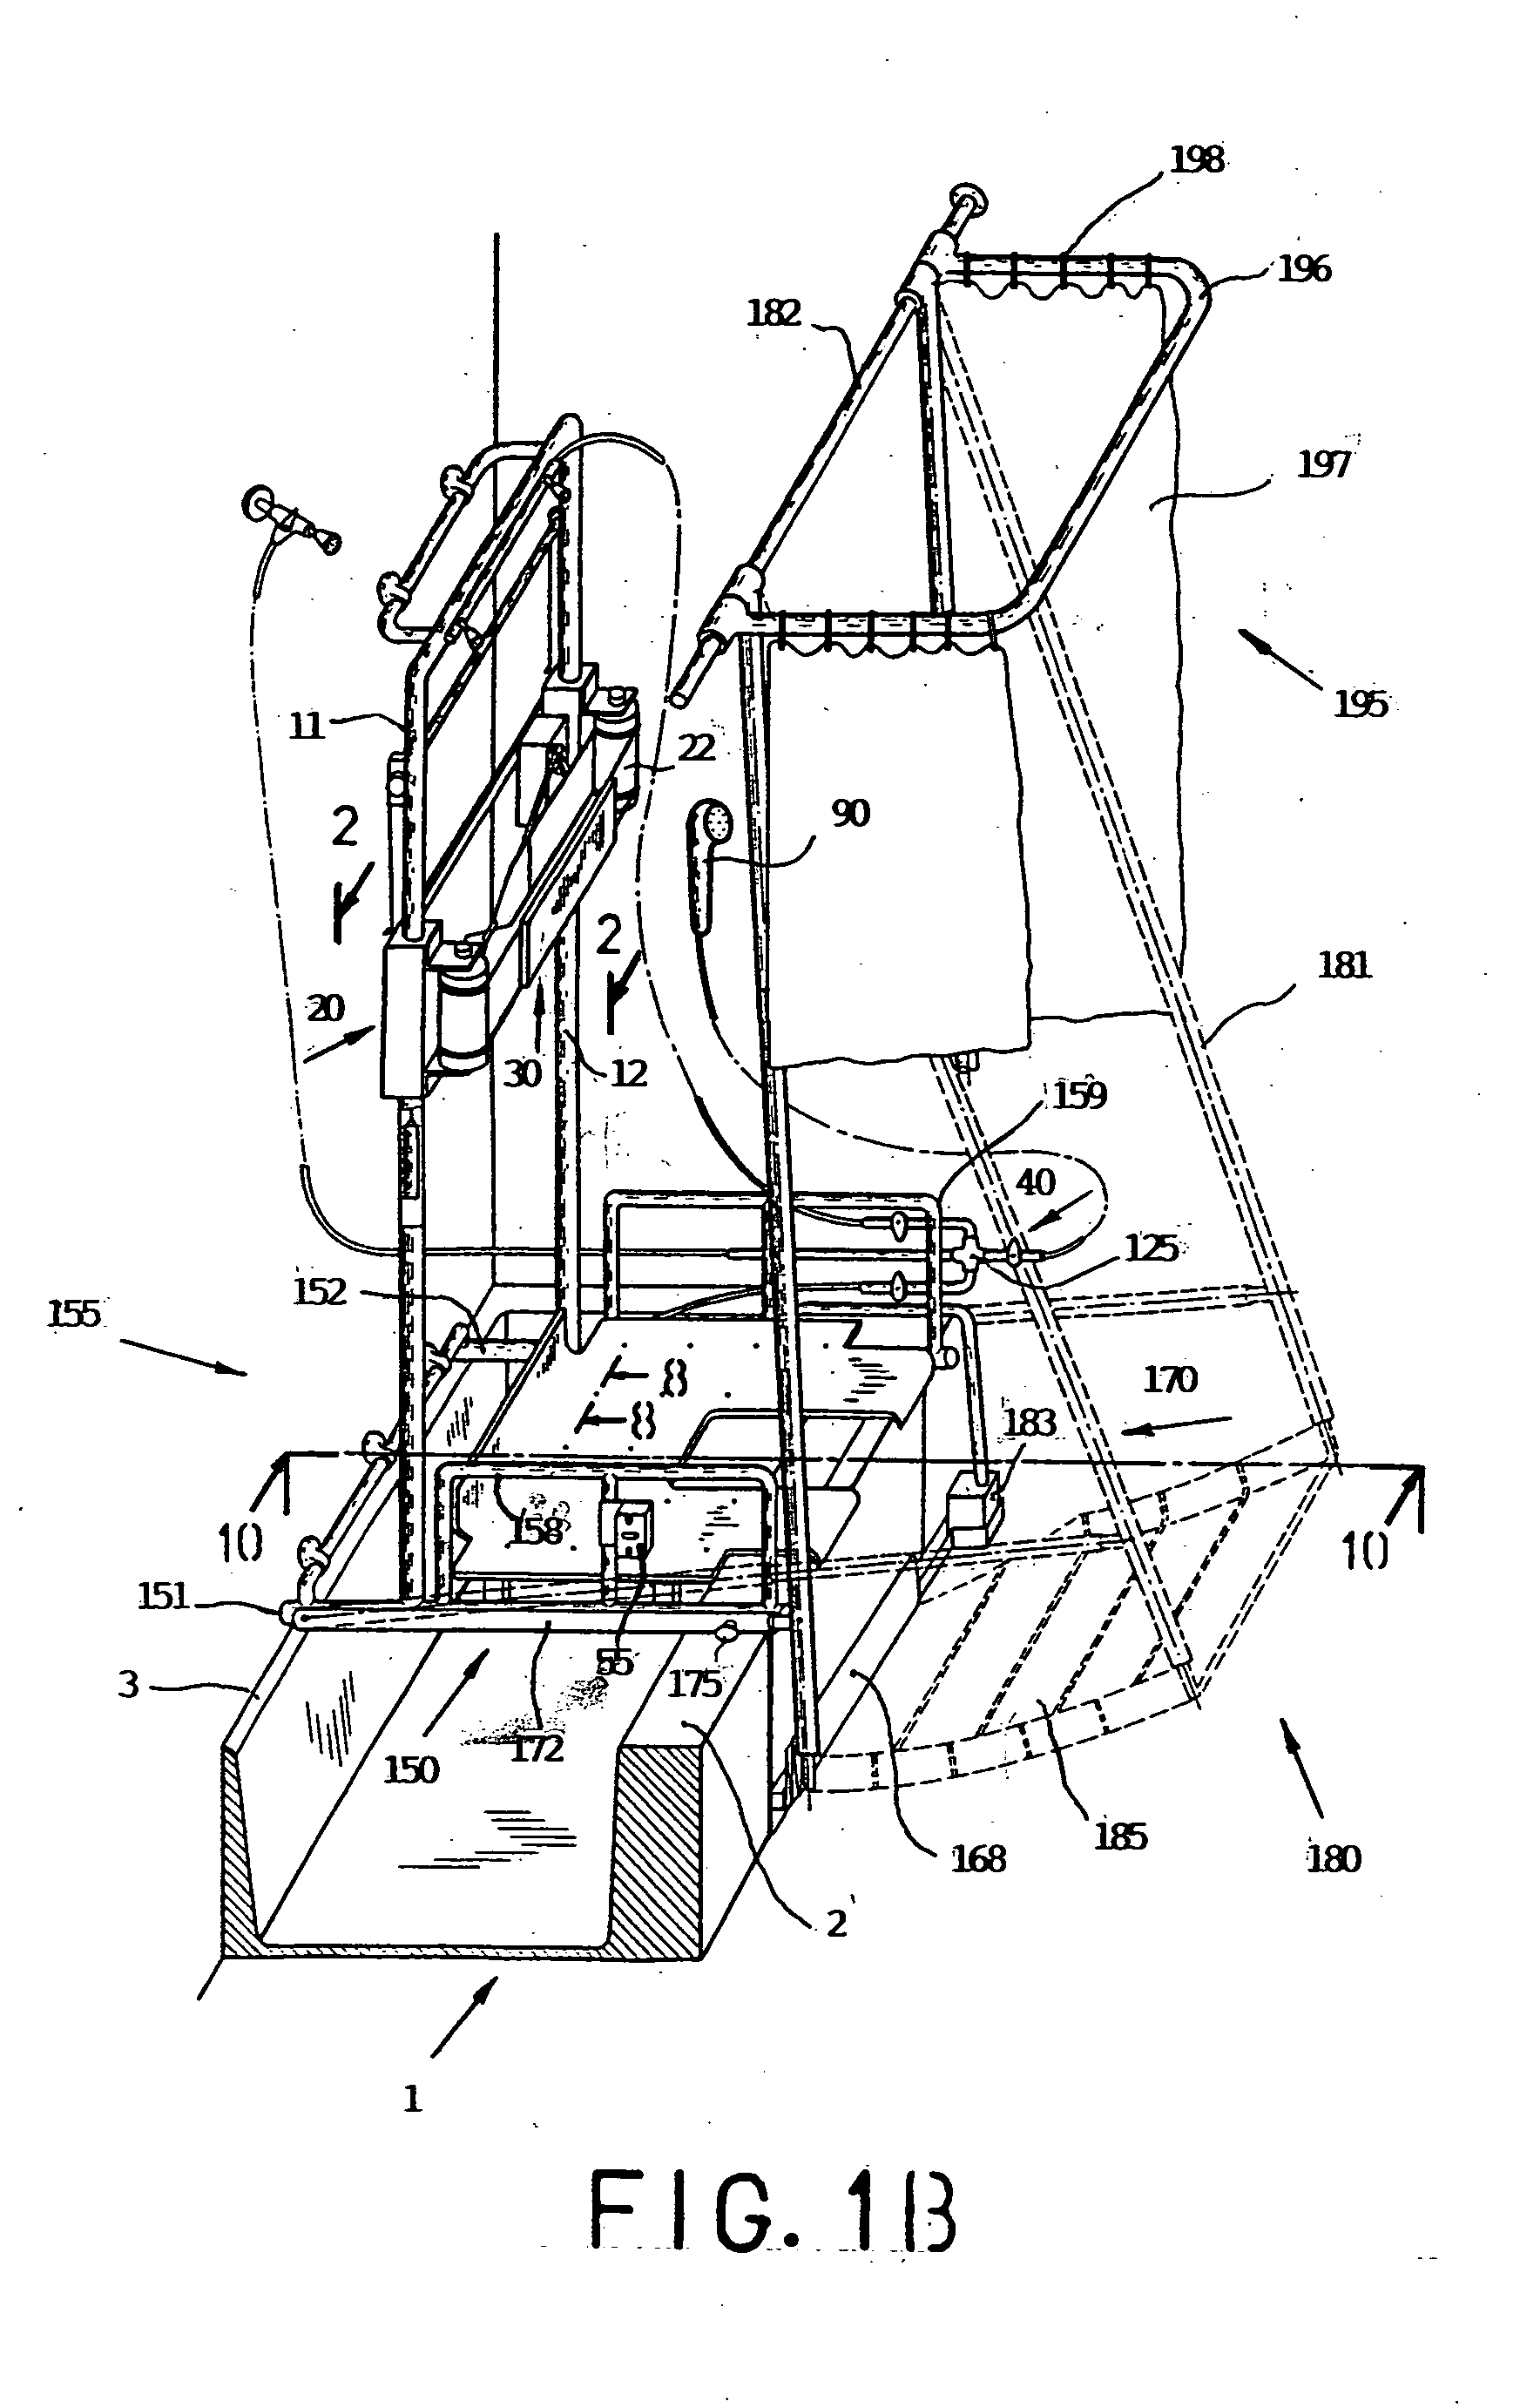 Apparatus for completely bathing onself by users of wheelchair and an elderly, infirm people